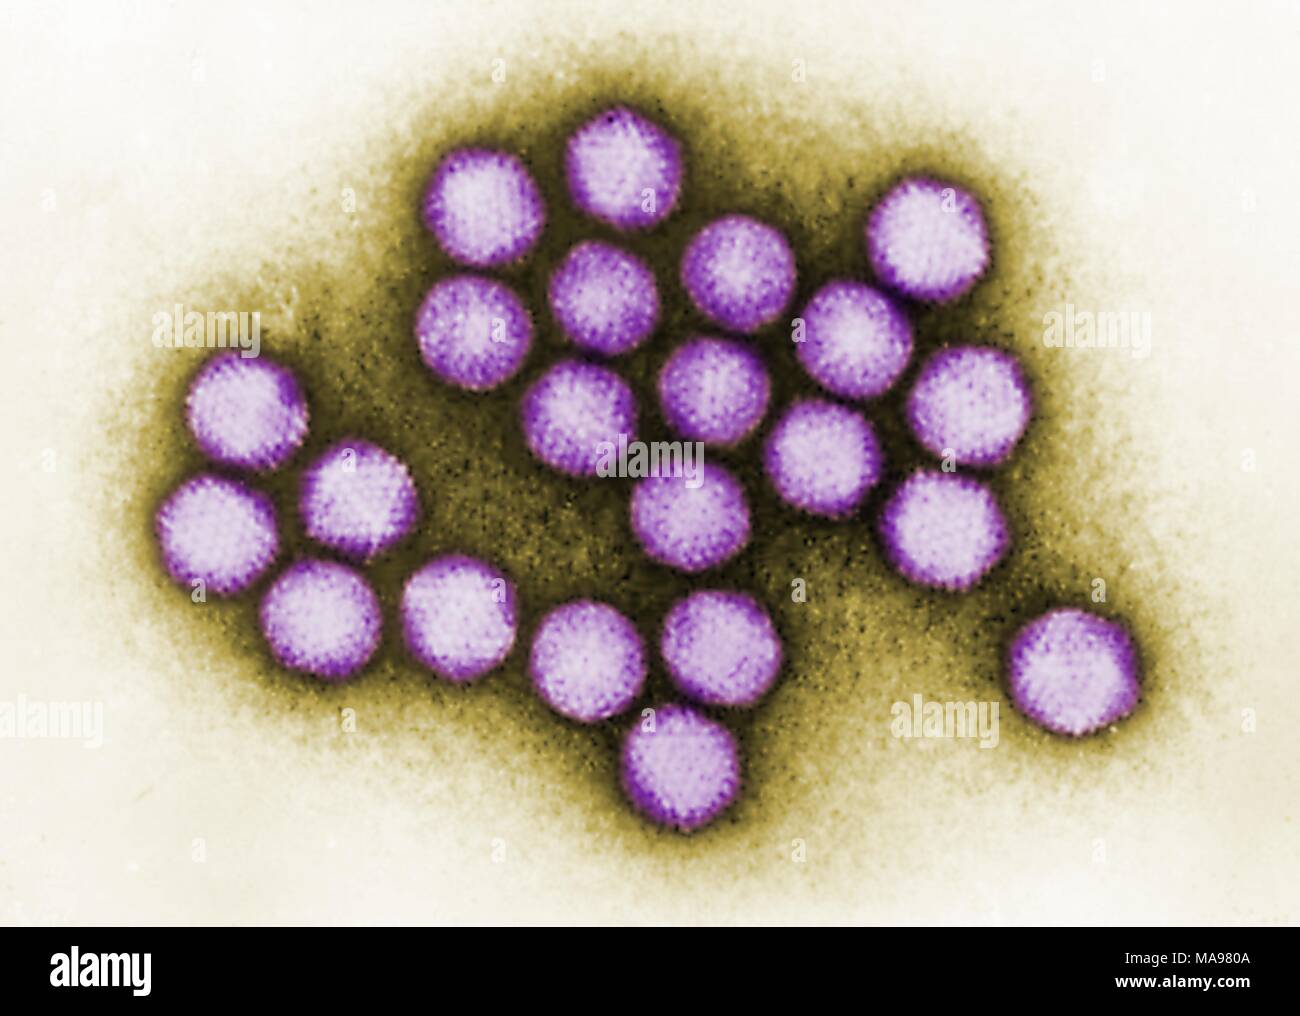 Colorized TEM (transmission electron microscopic) image of adenovirus, which can cause respiratory illnesses among other infections, 1981. Image courtesy CDC/Dr. G. William Gary, Jr. () Stock Photo